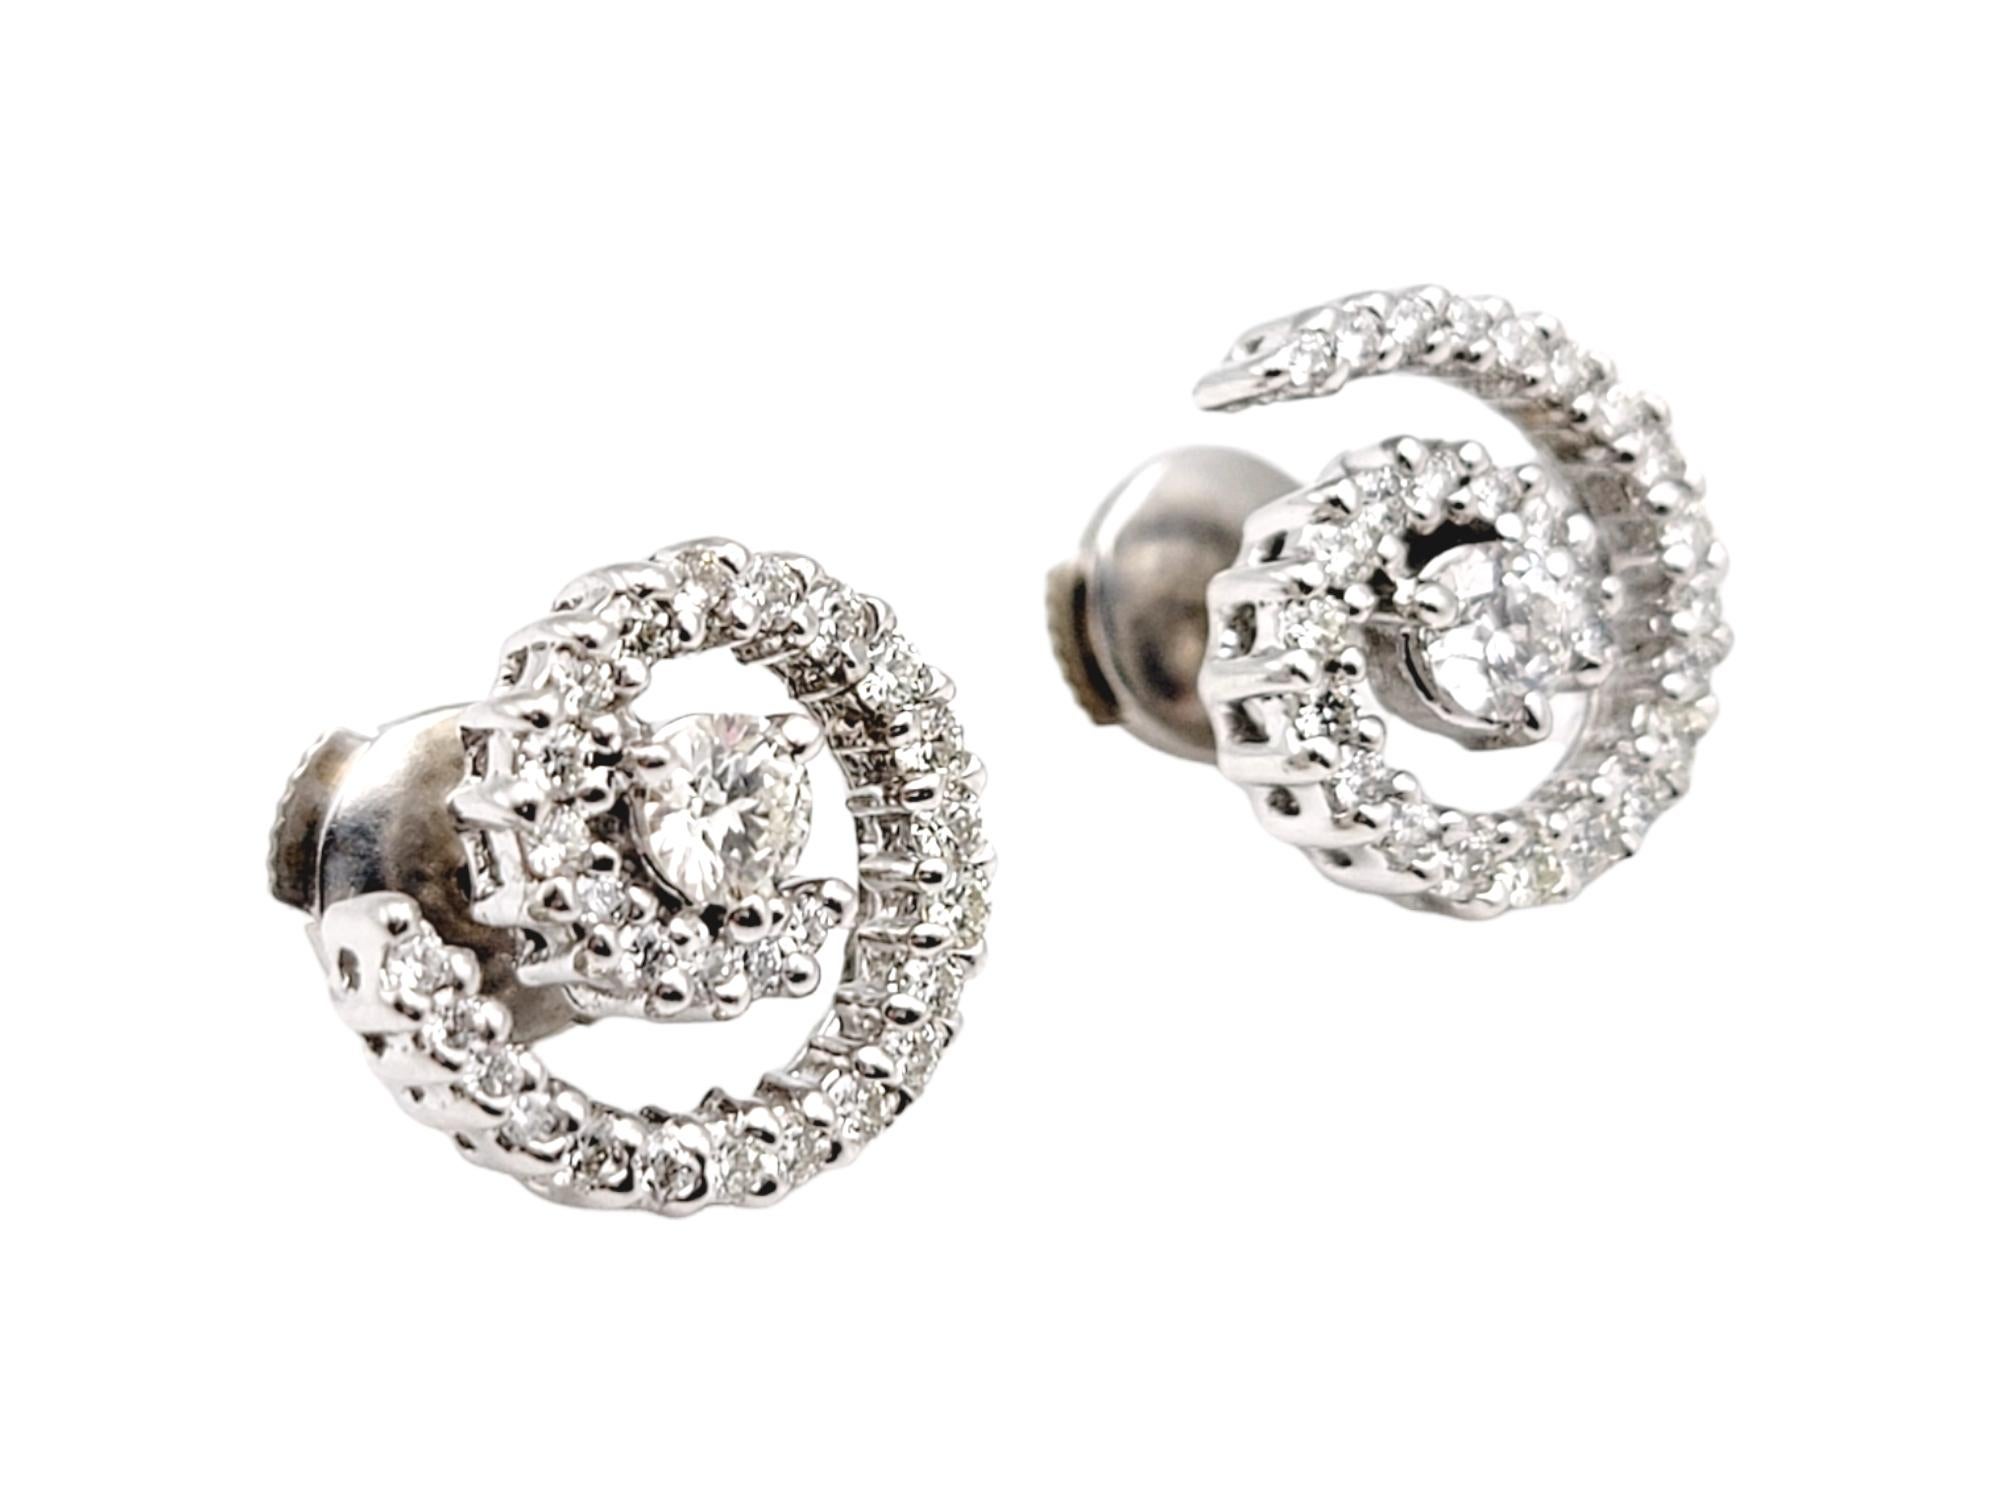 These glittering diamond spiral stud earrings are modern, sparkly and chic. The icy spiral of natural round diamonds goes with just about everything and can be dressed up or down. The luxurious 18 karat white gold setting further enhances the white